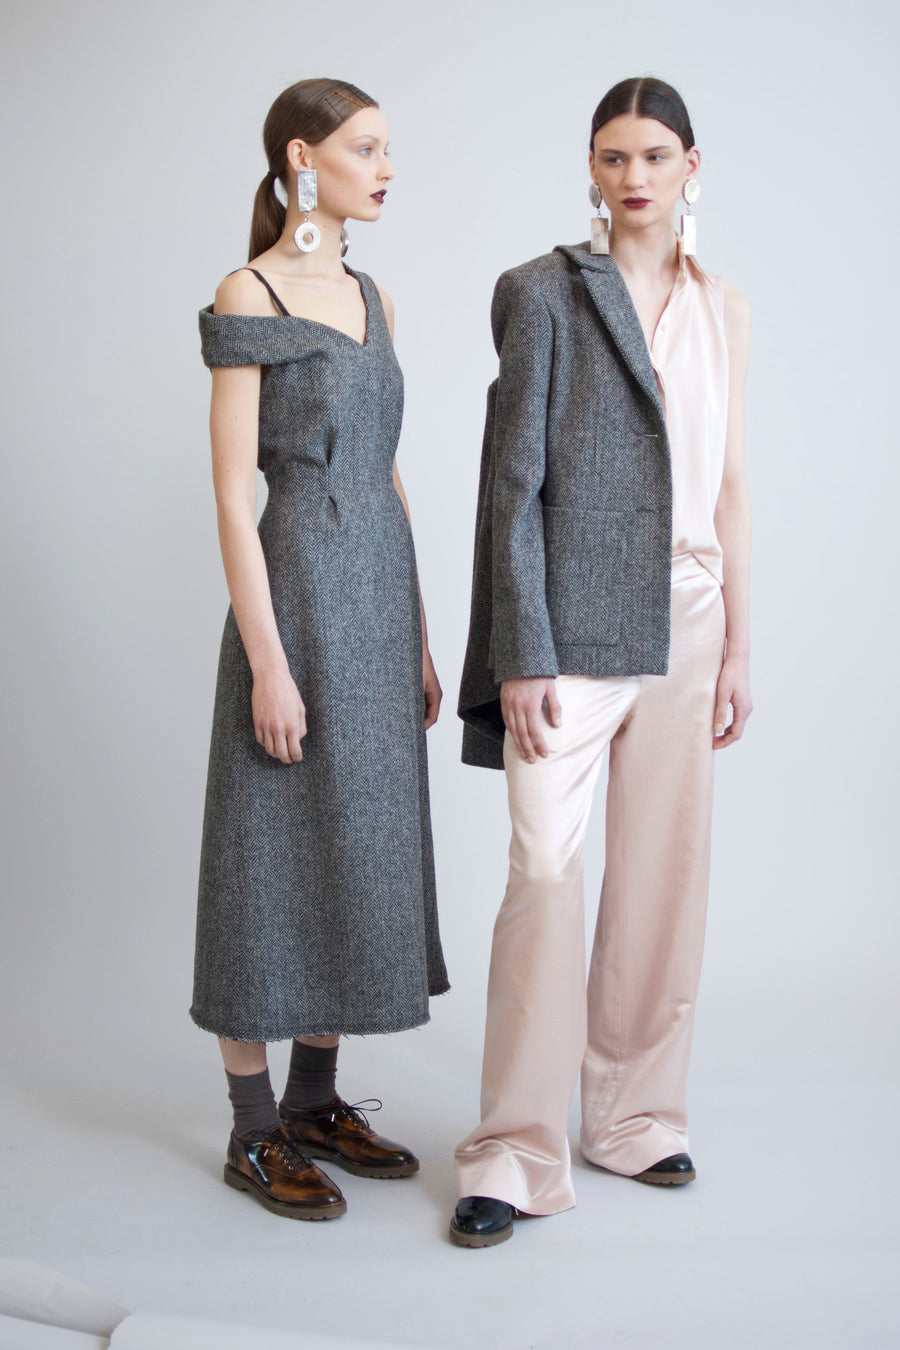 AW2015 / Look 7